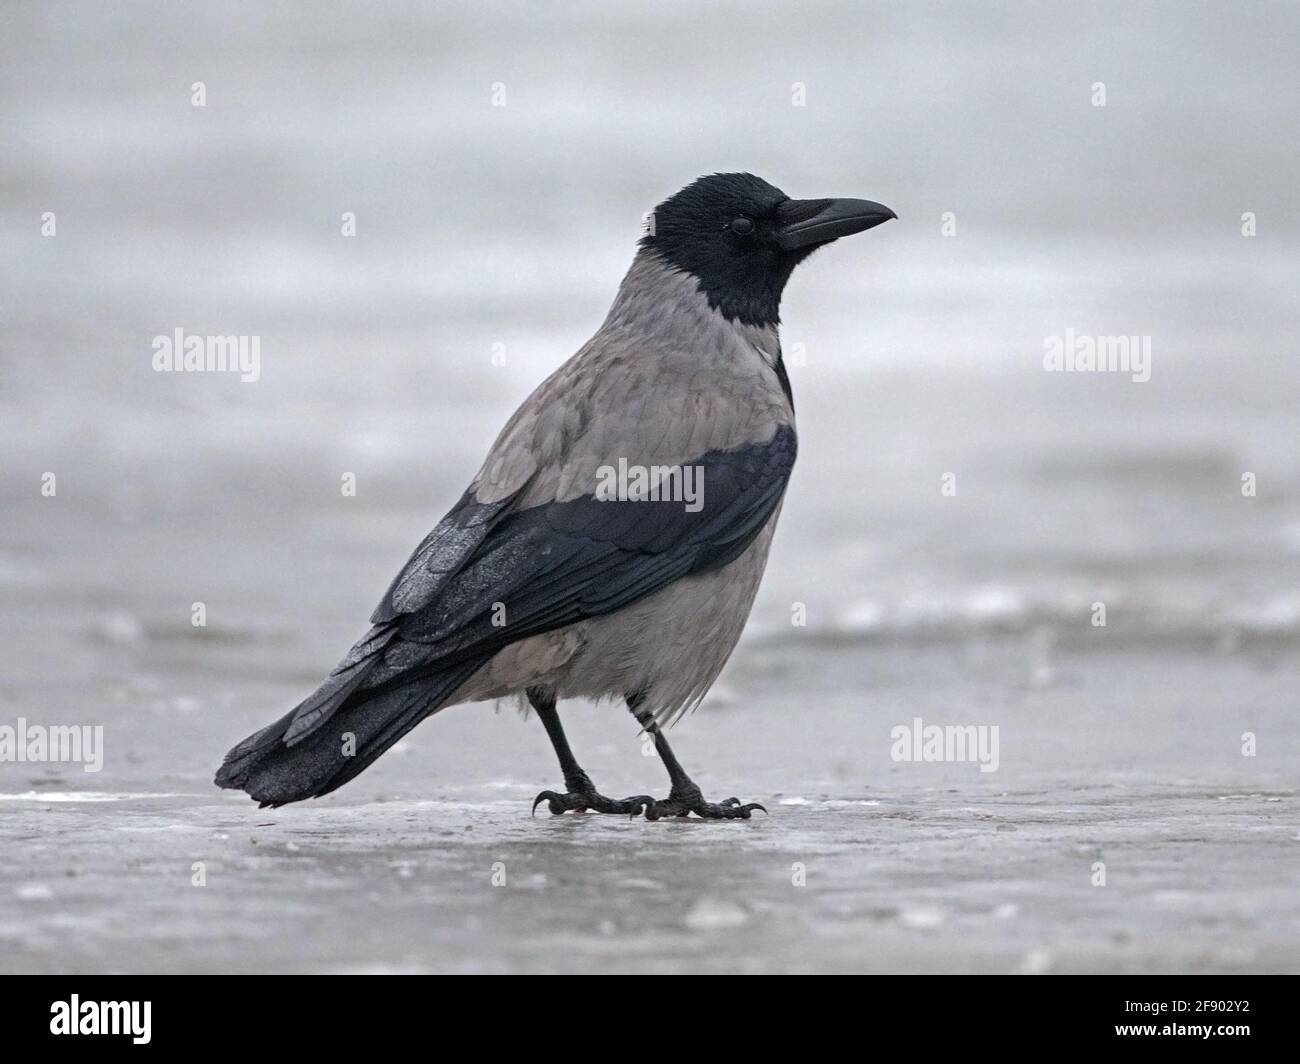 Hooded crow standing in snow Stock Photo